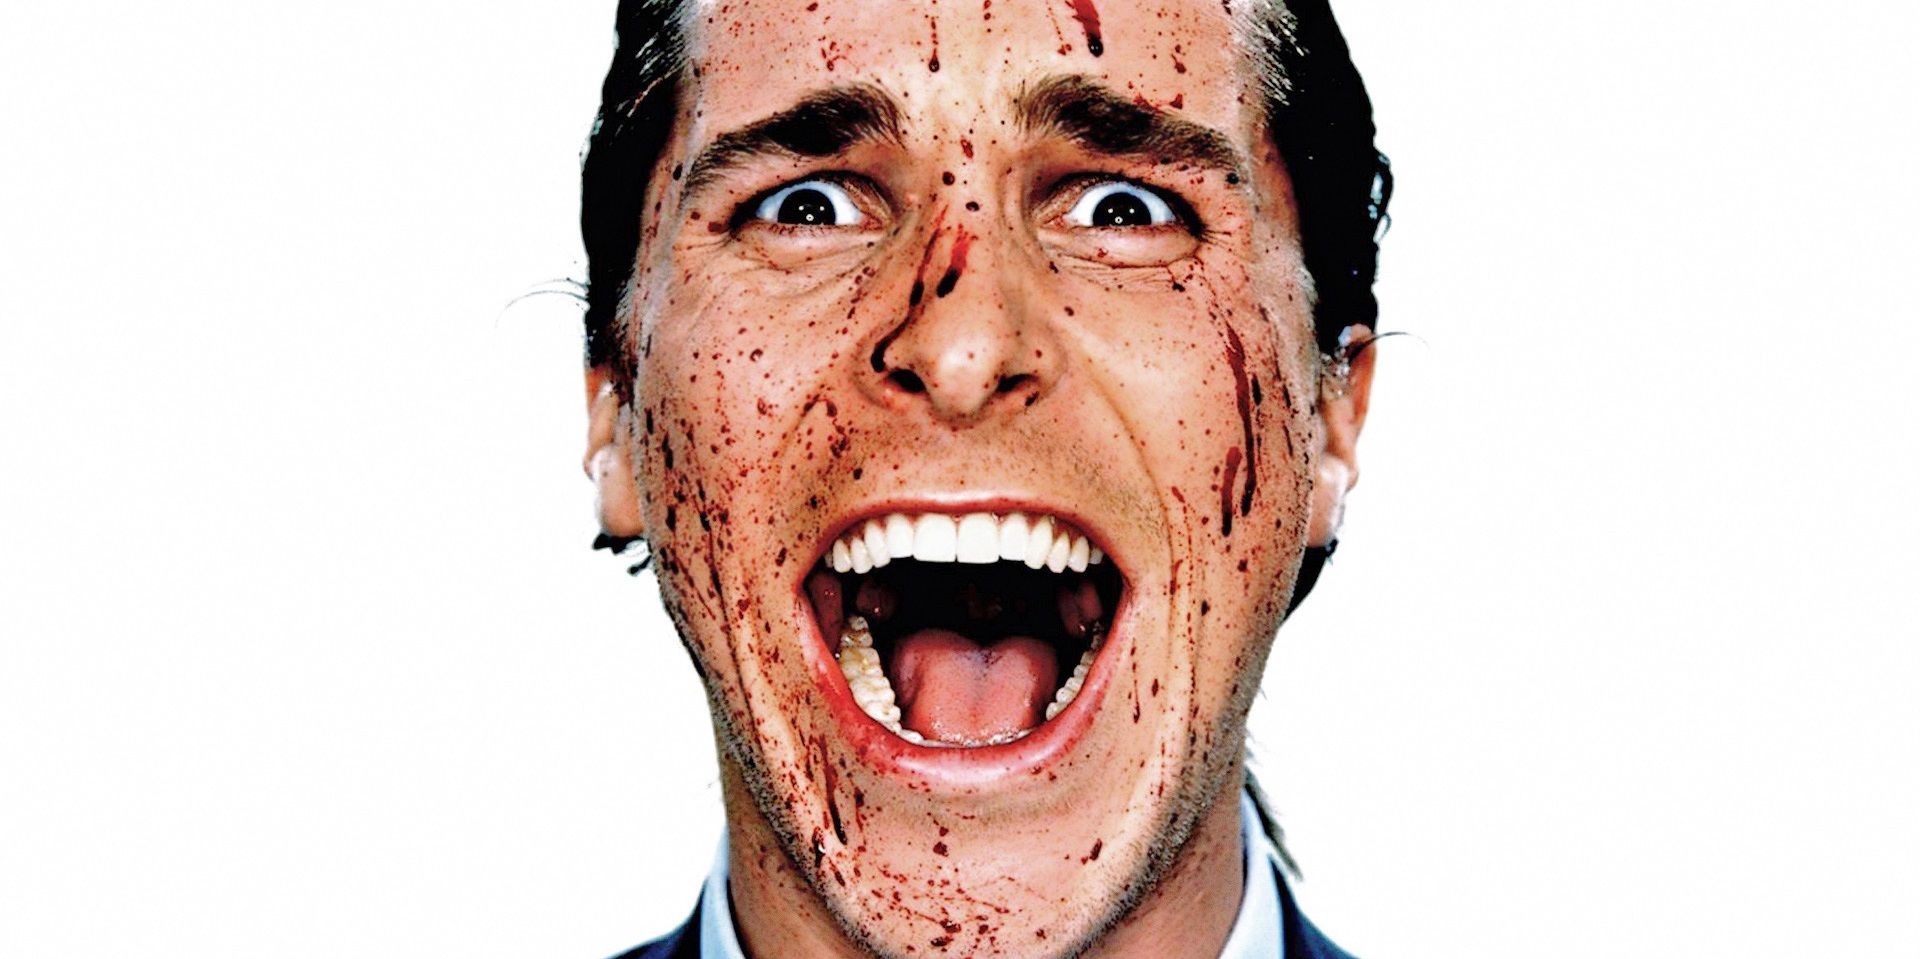 Patrick Bateman screaming with his face covered in blood in American Psycho.